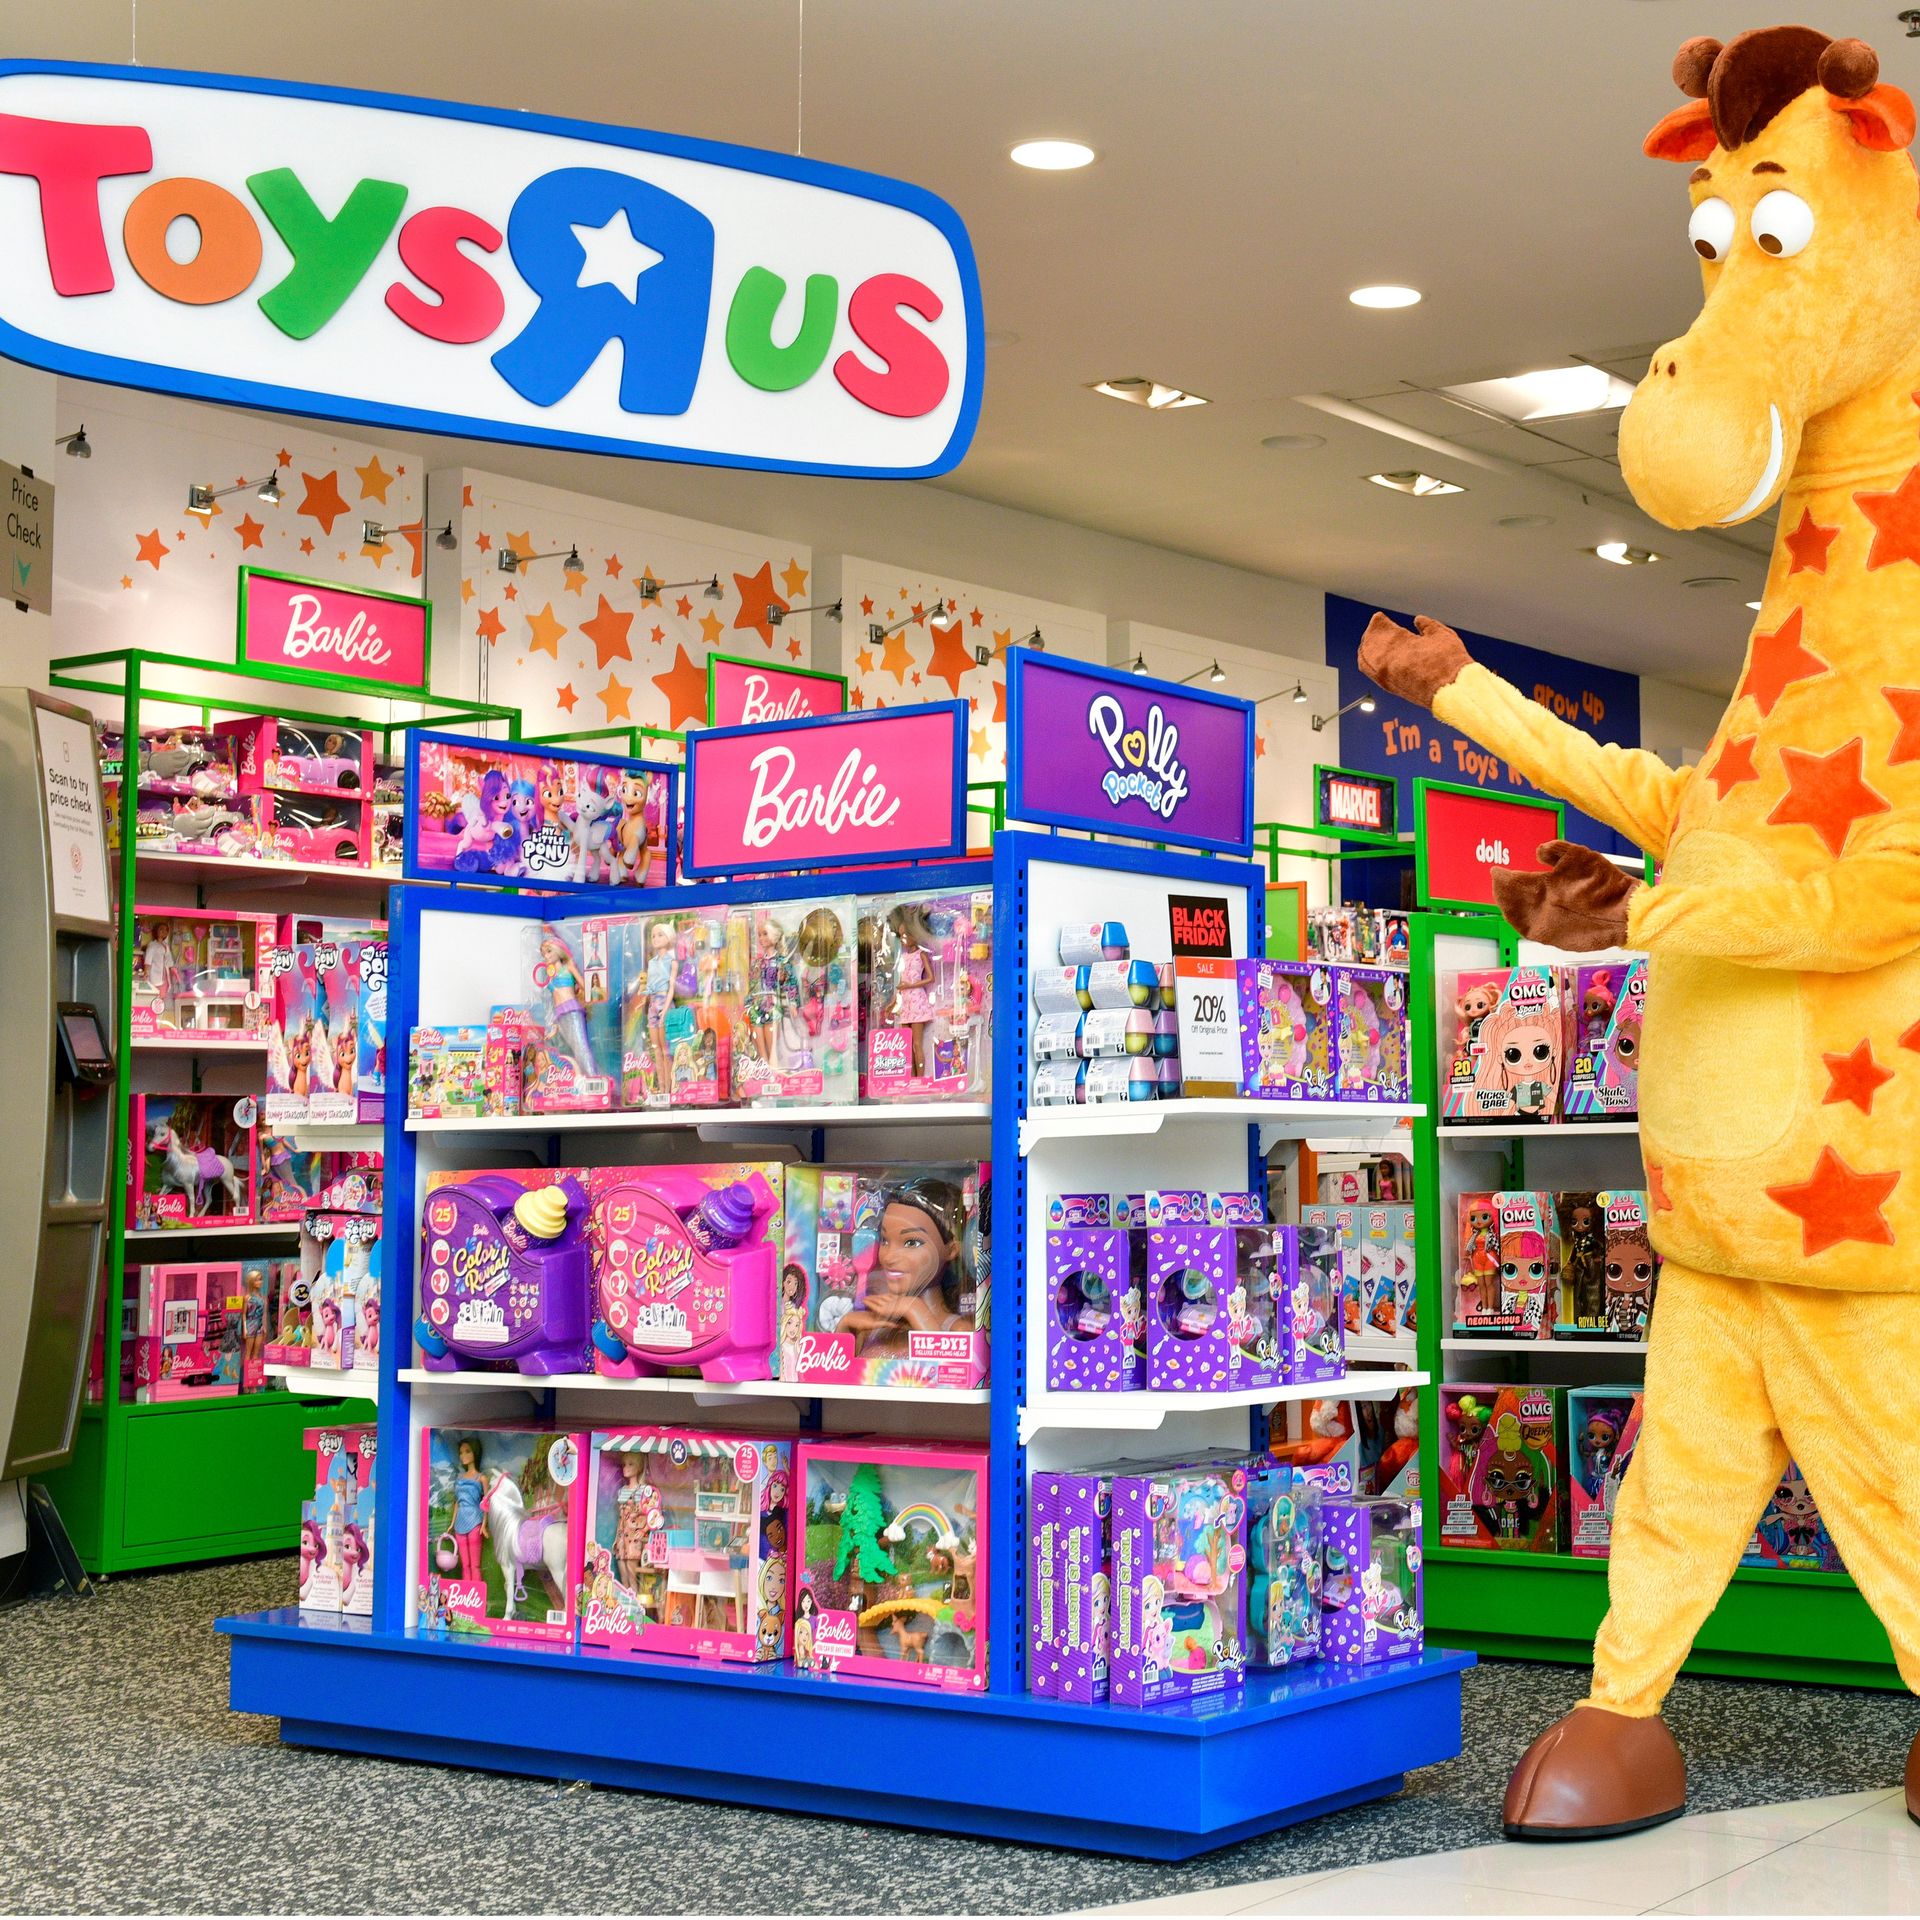 Macy's Toys R Us shops open nationwide with 9 days of free events